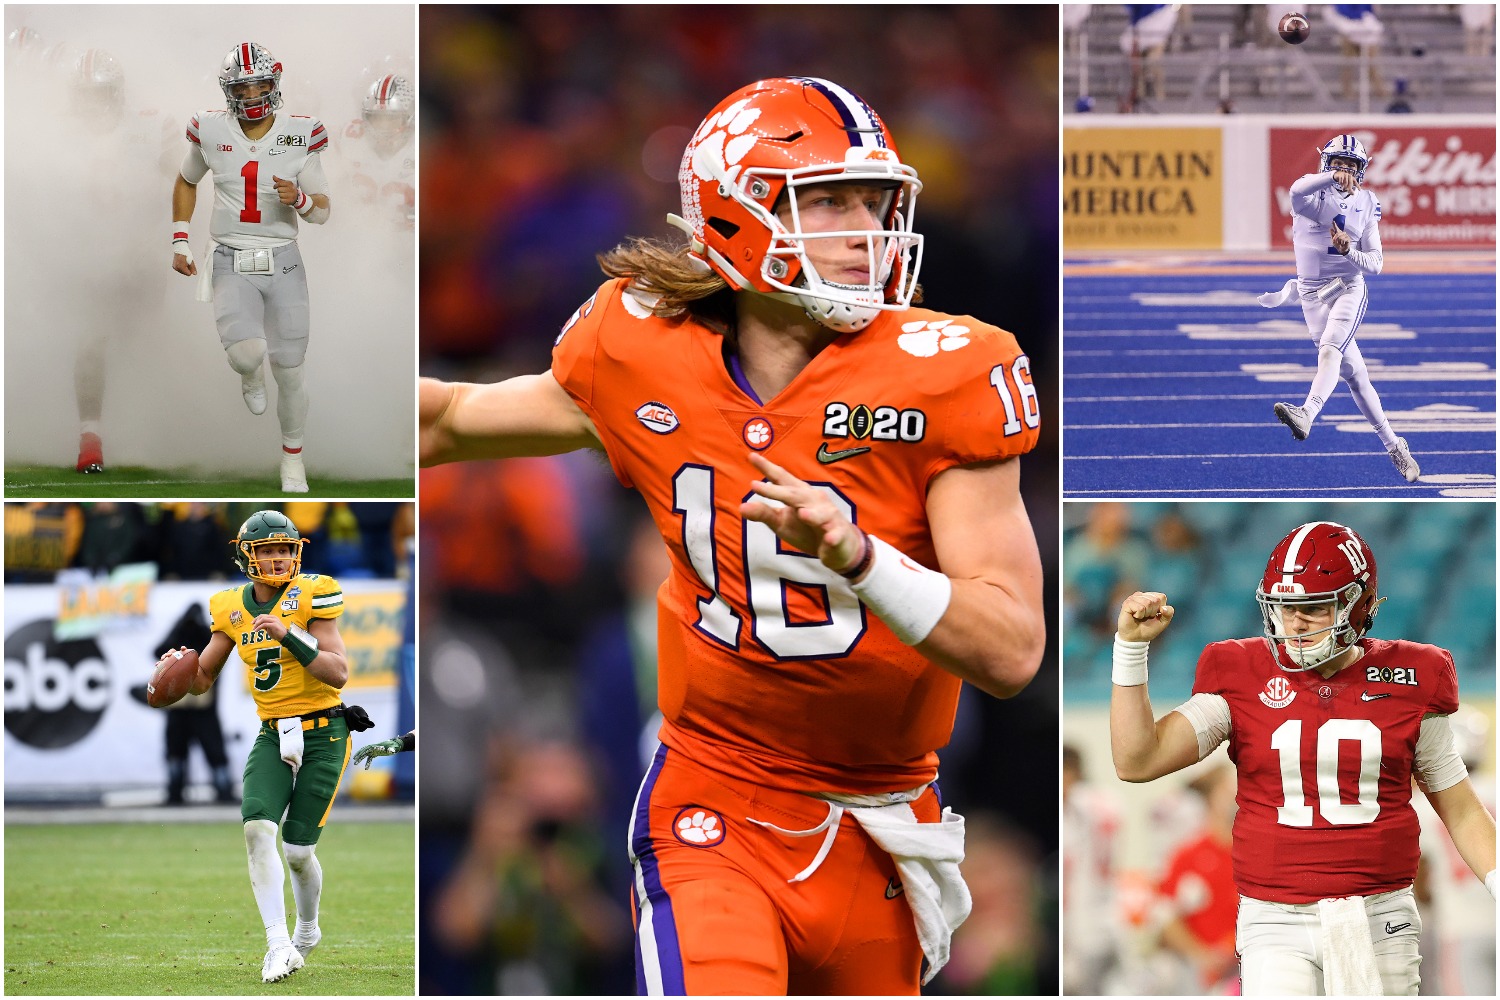 The top quarterback prospects for the 2021 NFL draft include Trevor Lawrence, Justin Fields, Zach Wilson, Trey Lance, and Mac Jones.